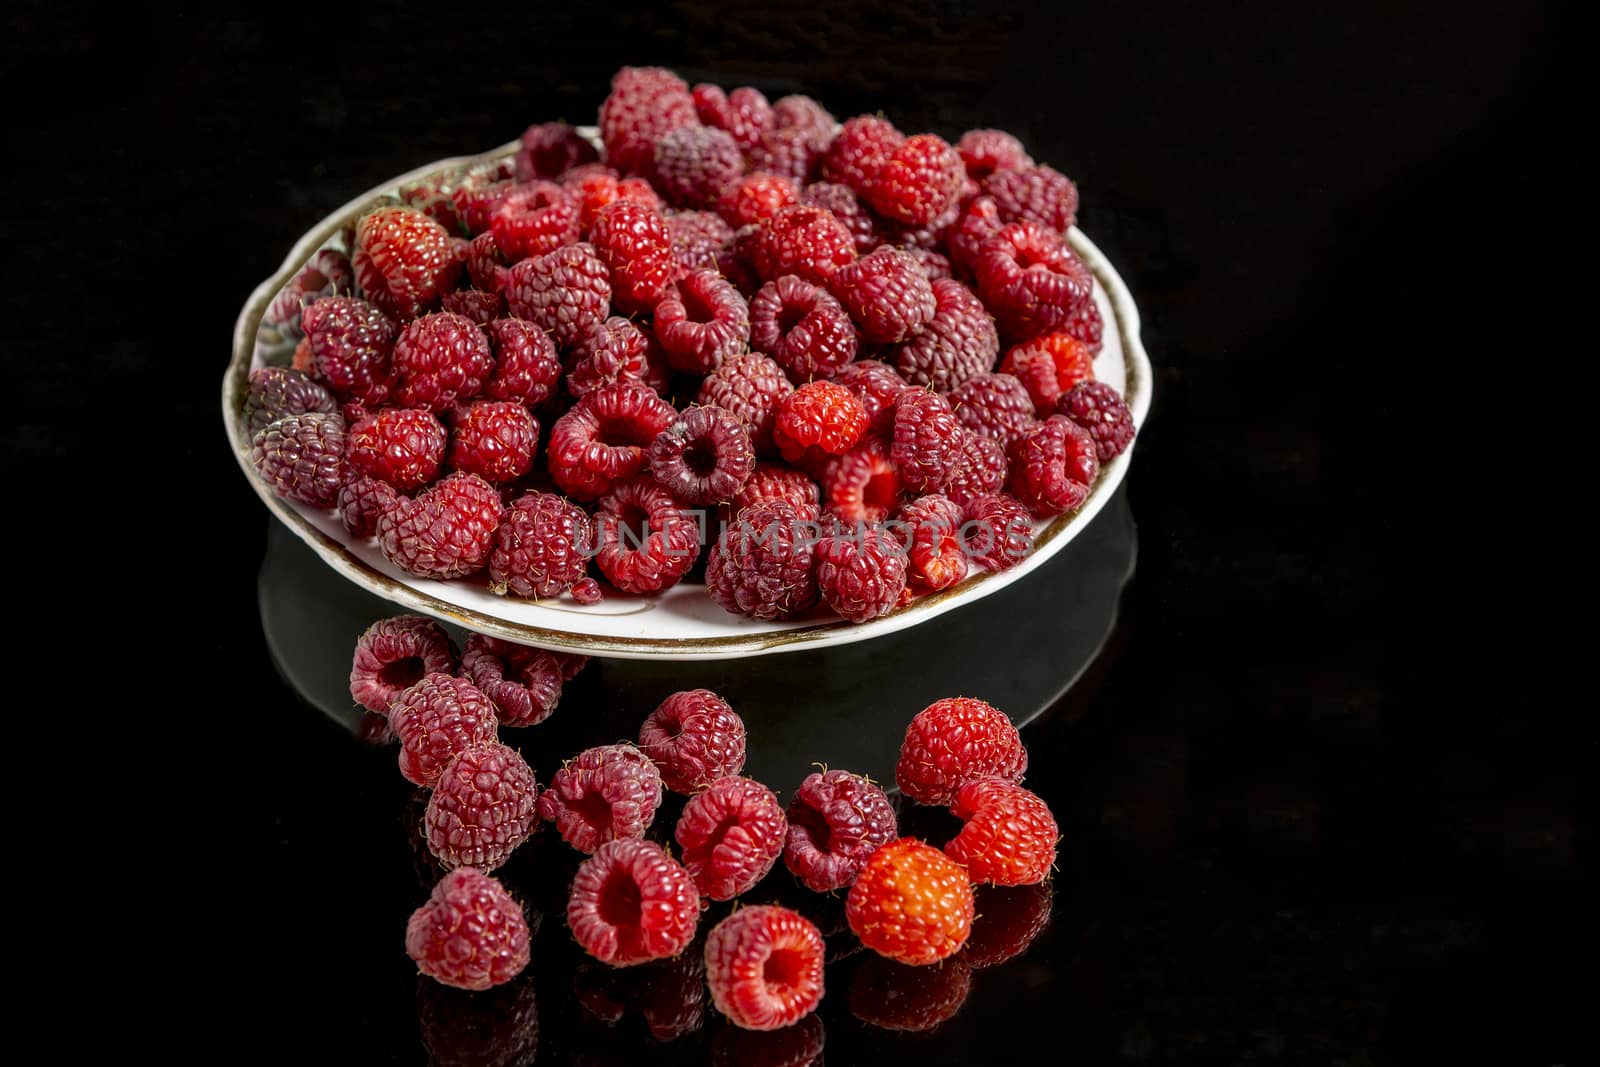 Raspberry berry on a white plate against a black background with reflection